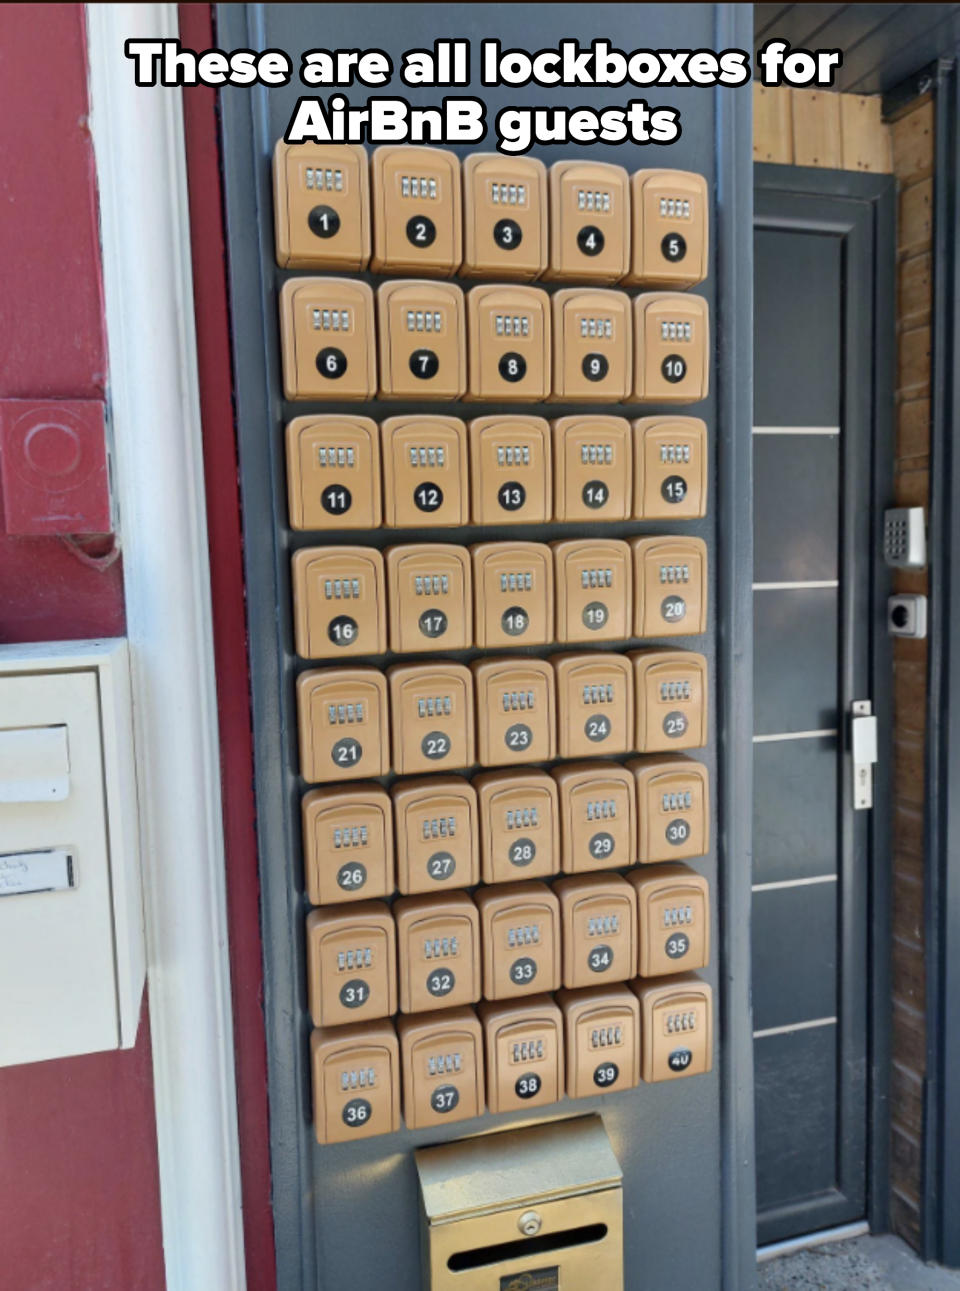 A wall with 40 lockboxes, each numbered from 1 to 40 in 4 columns, are next to a door with a security system keypad